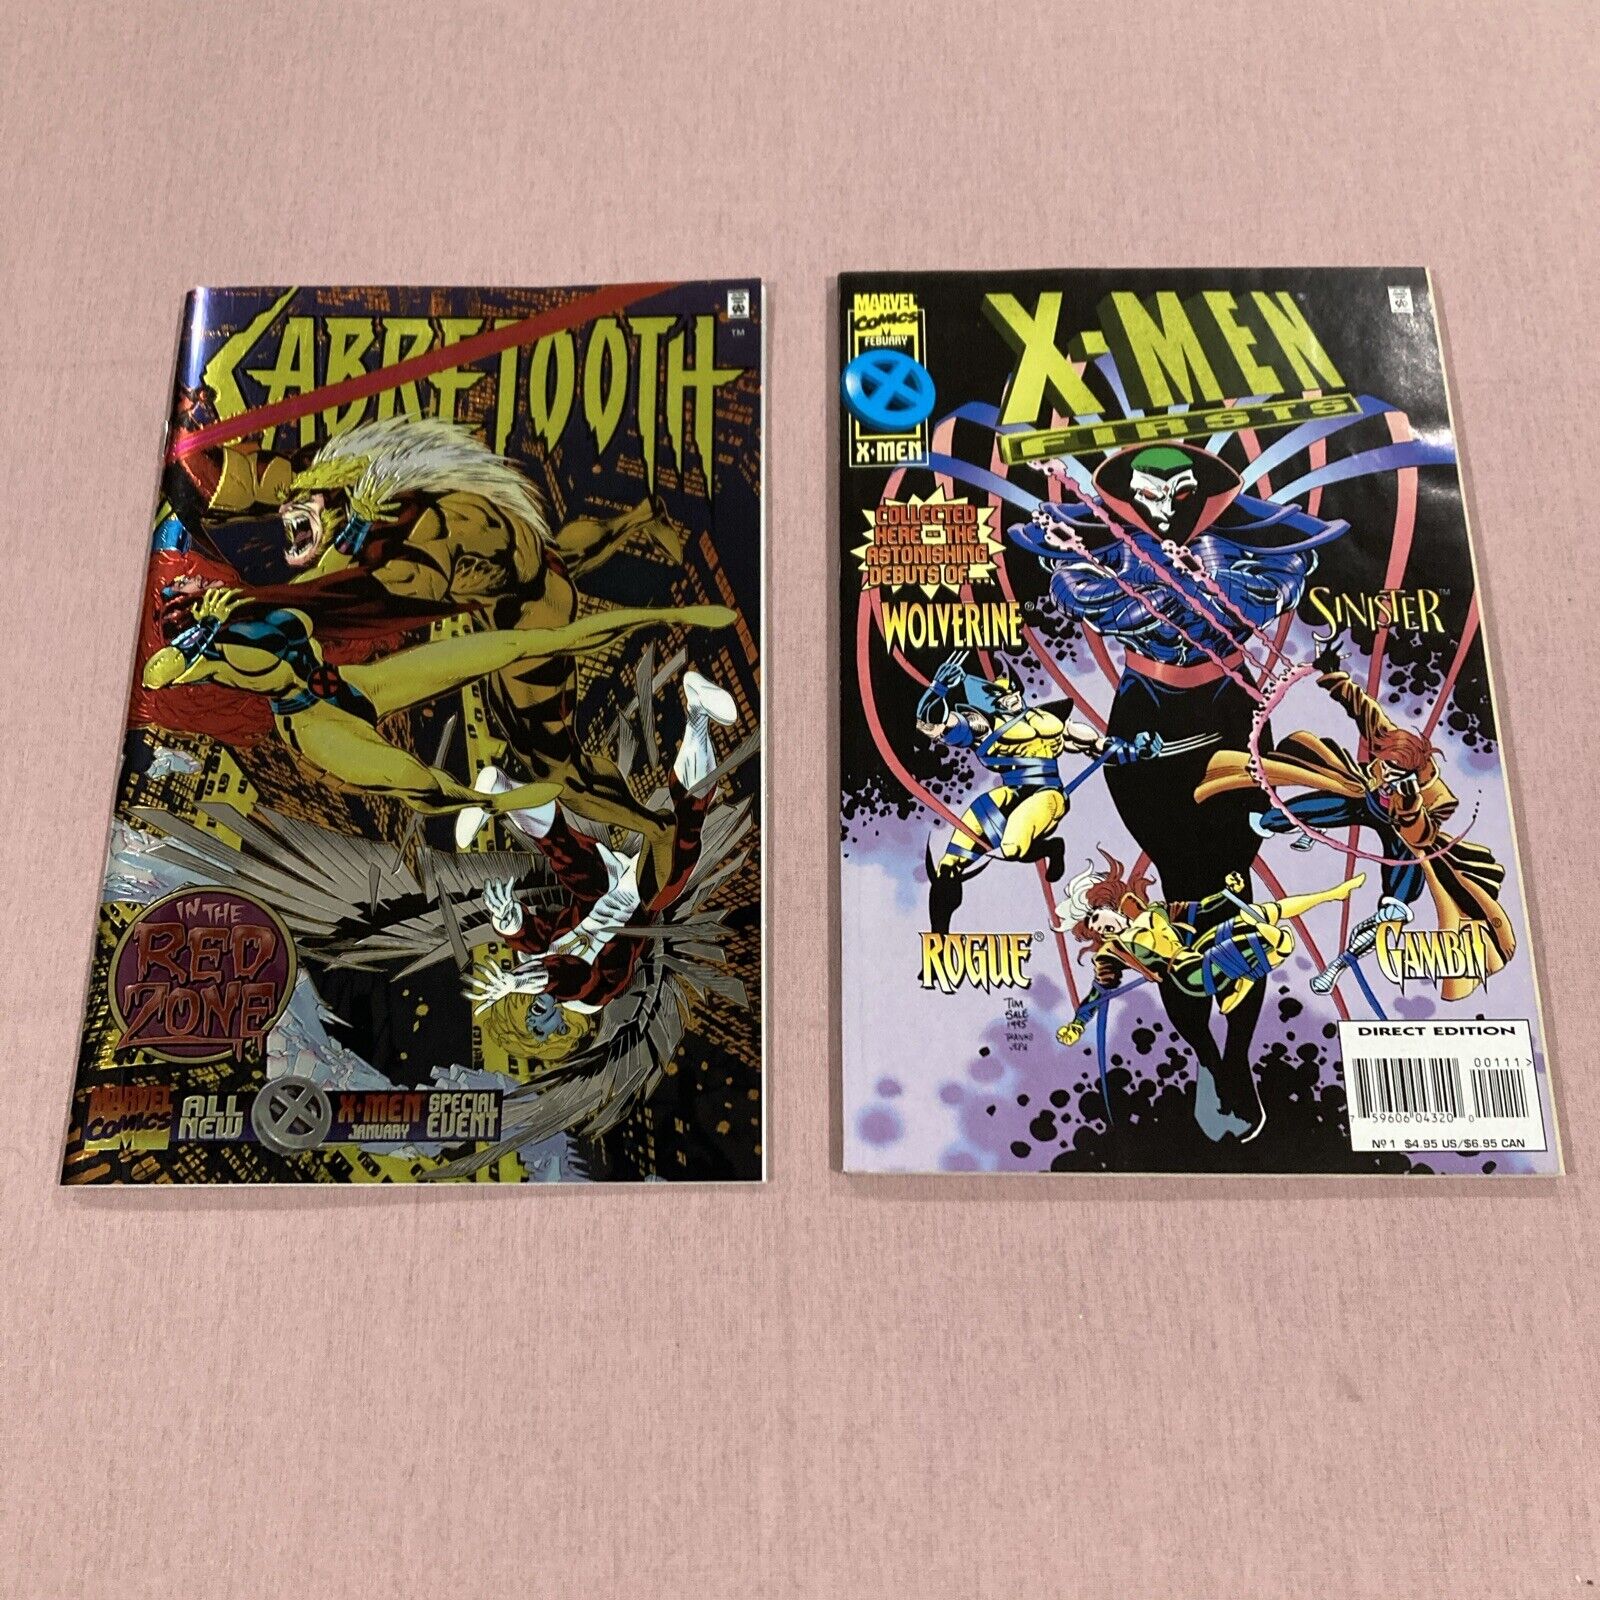 Sabretooth #1 & X-Men Firsts #1, 1995 Wolverine, Hulk, Sinister, Avengers, Rogue